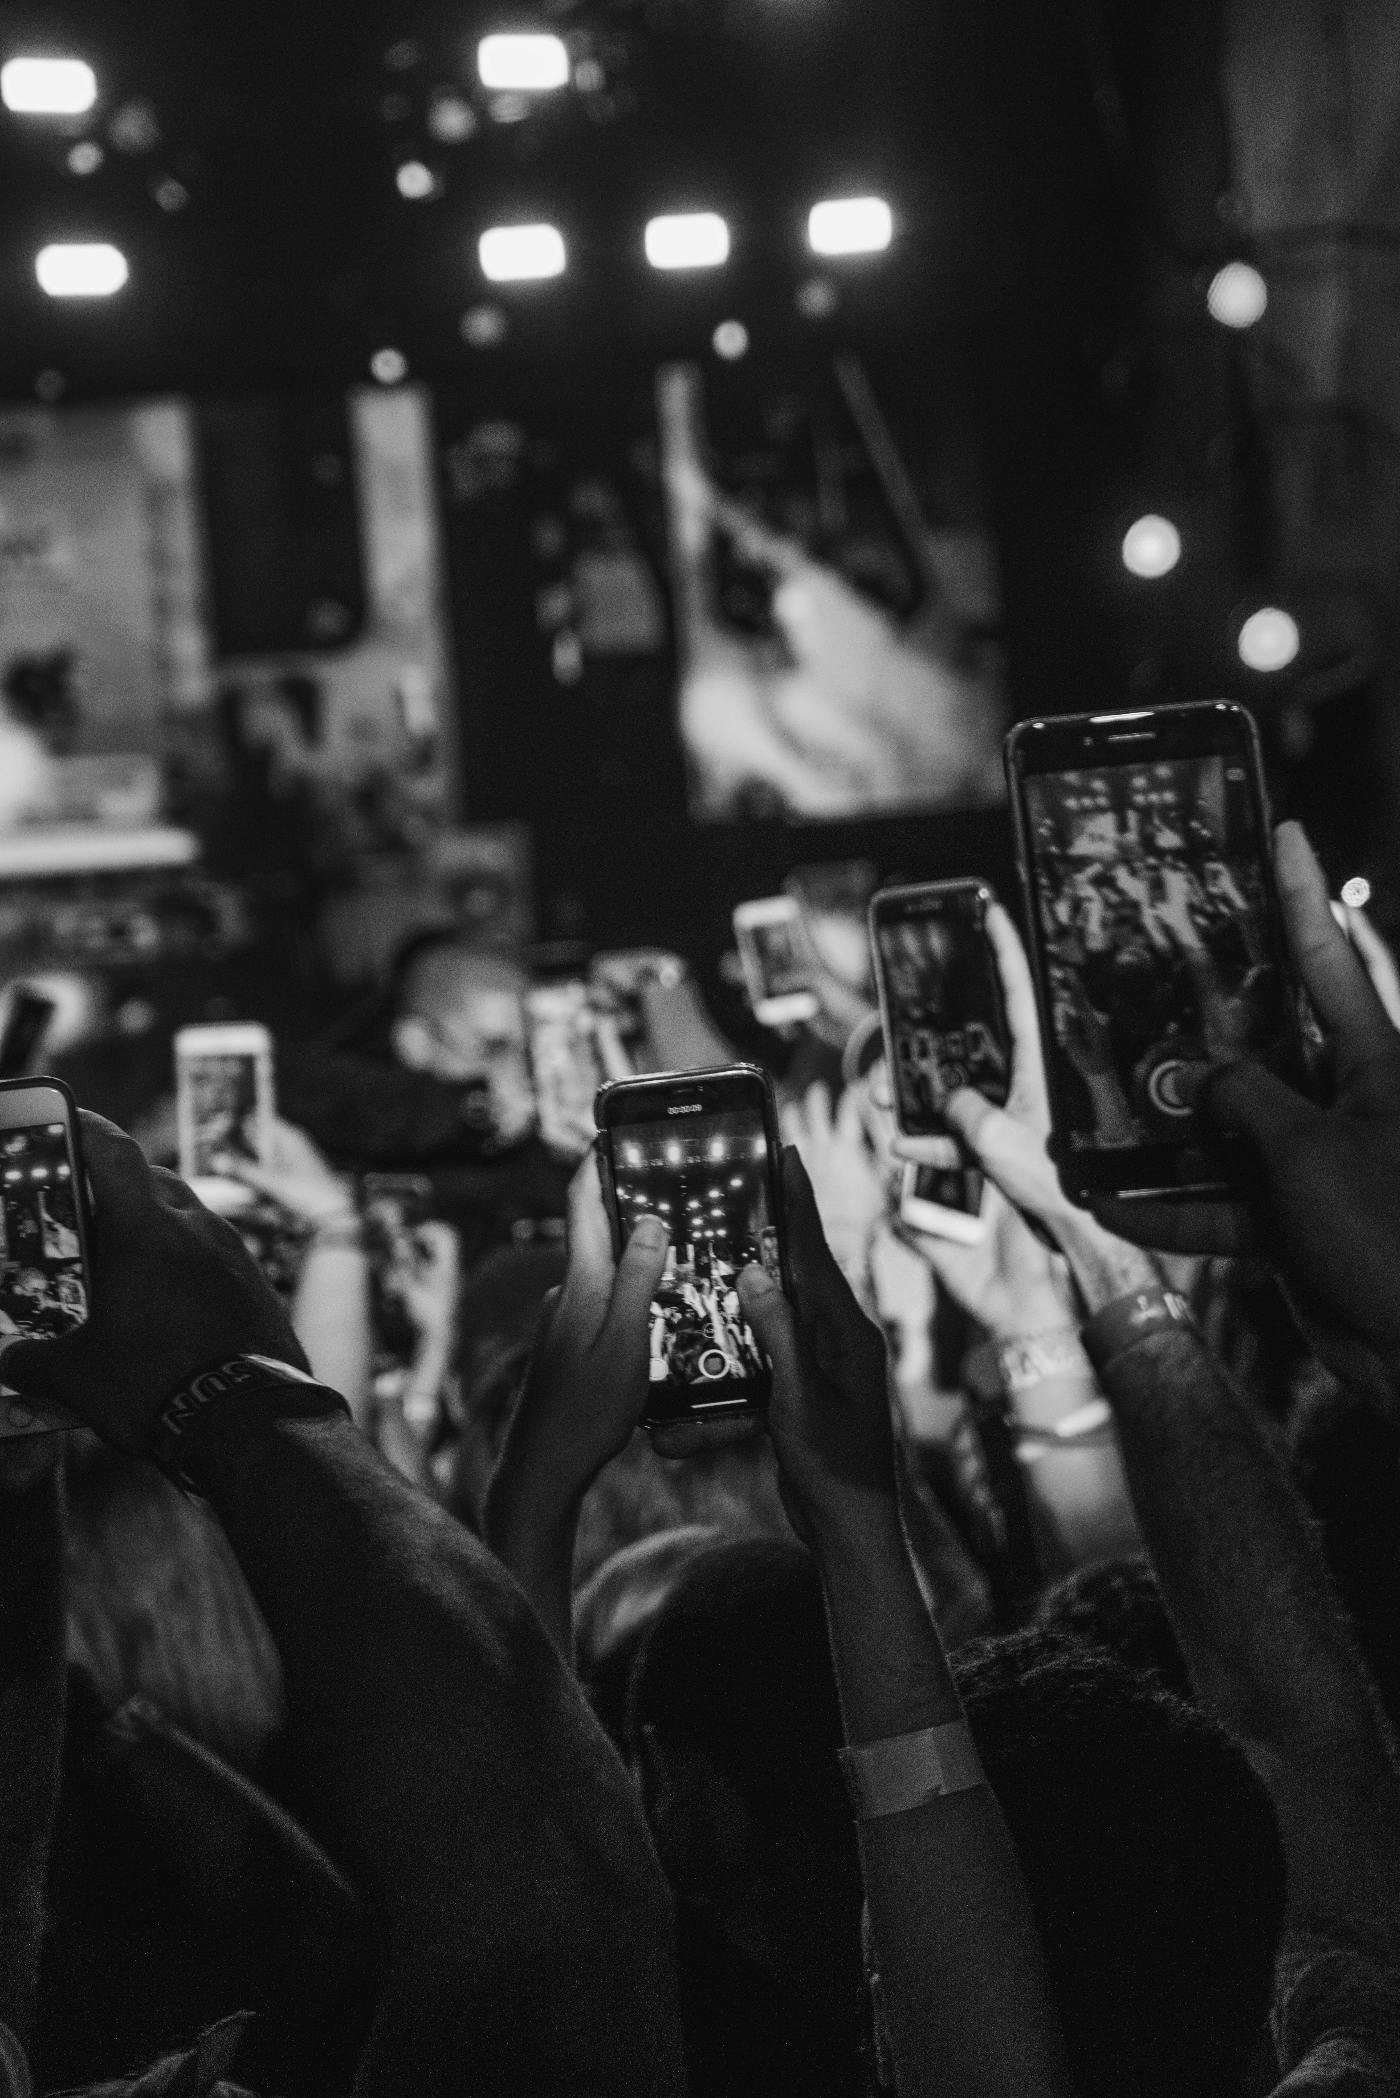 Many people holding up their phones and filming a concert